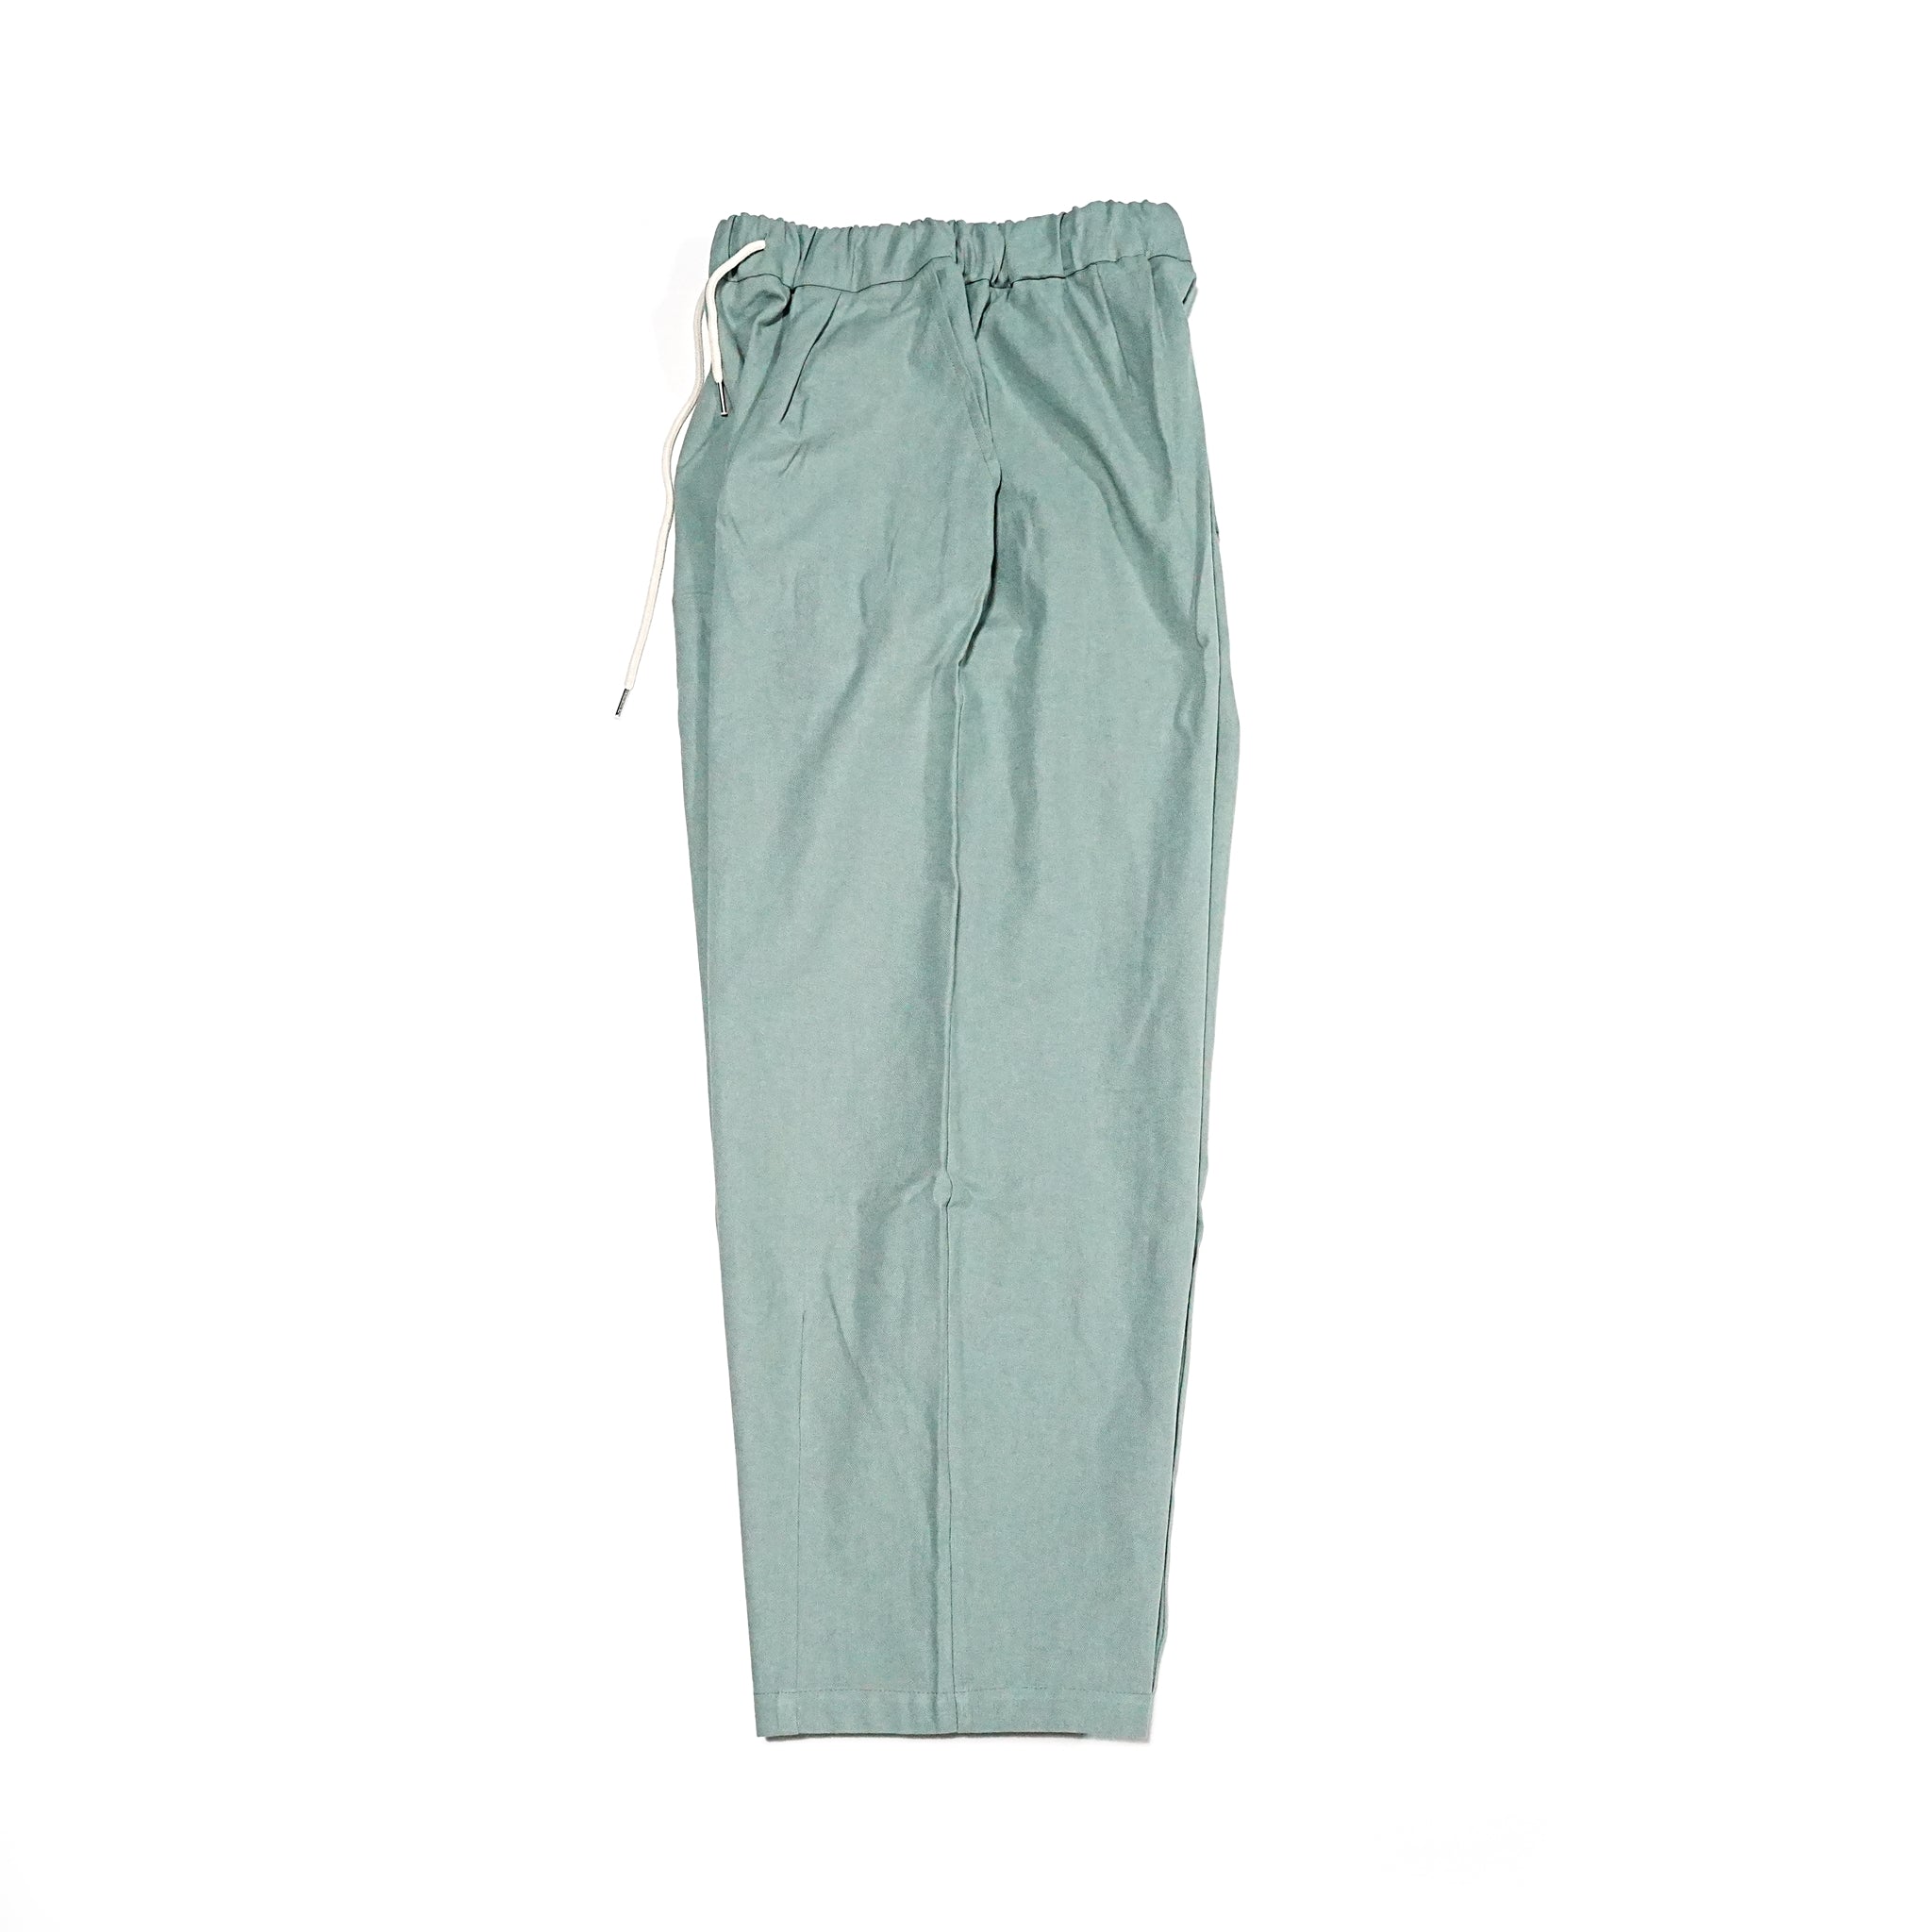 No:co-2023aw01b | Name:BOY WIDE CHINO PANTS | Color:Mint Green【CONICHIWA BONJOUR_コニチワボンジュール】